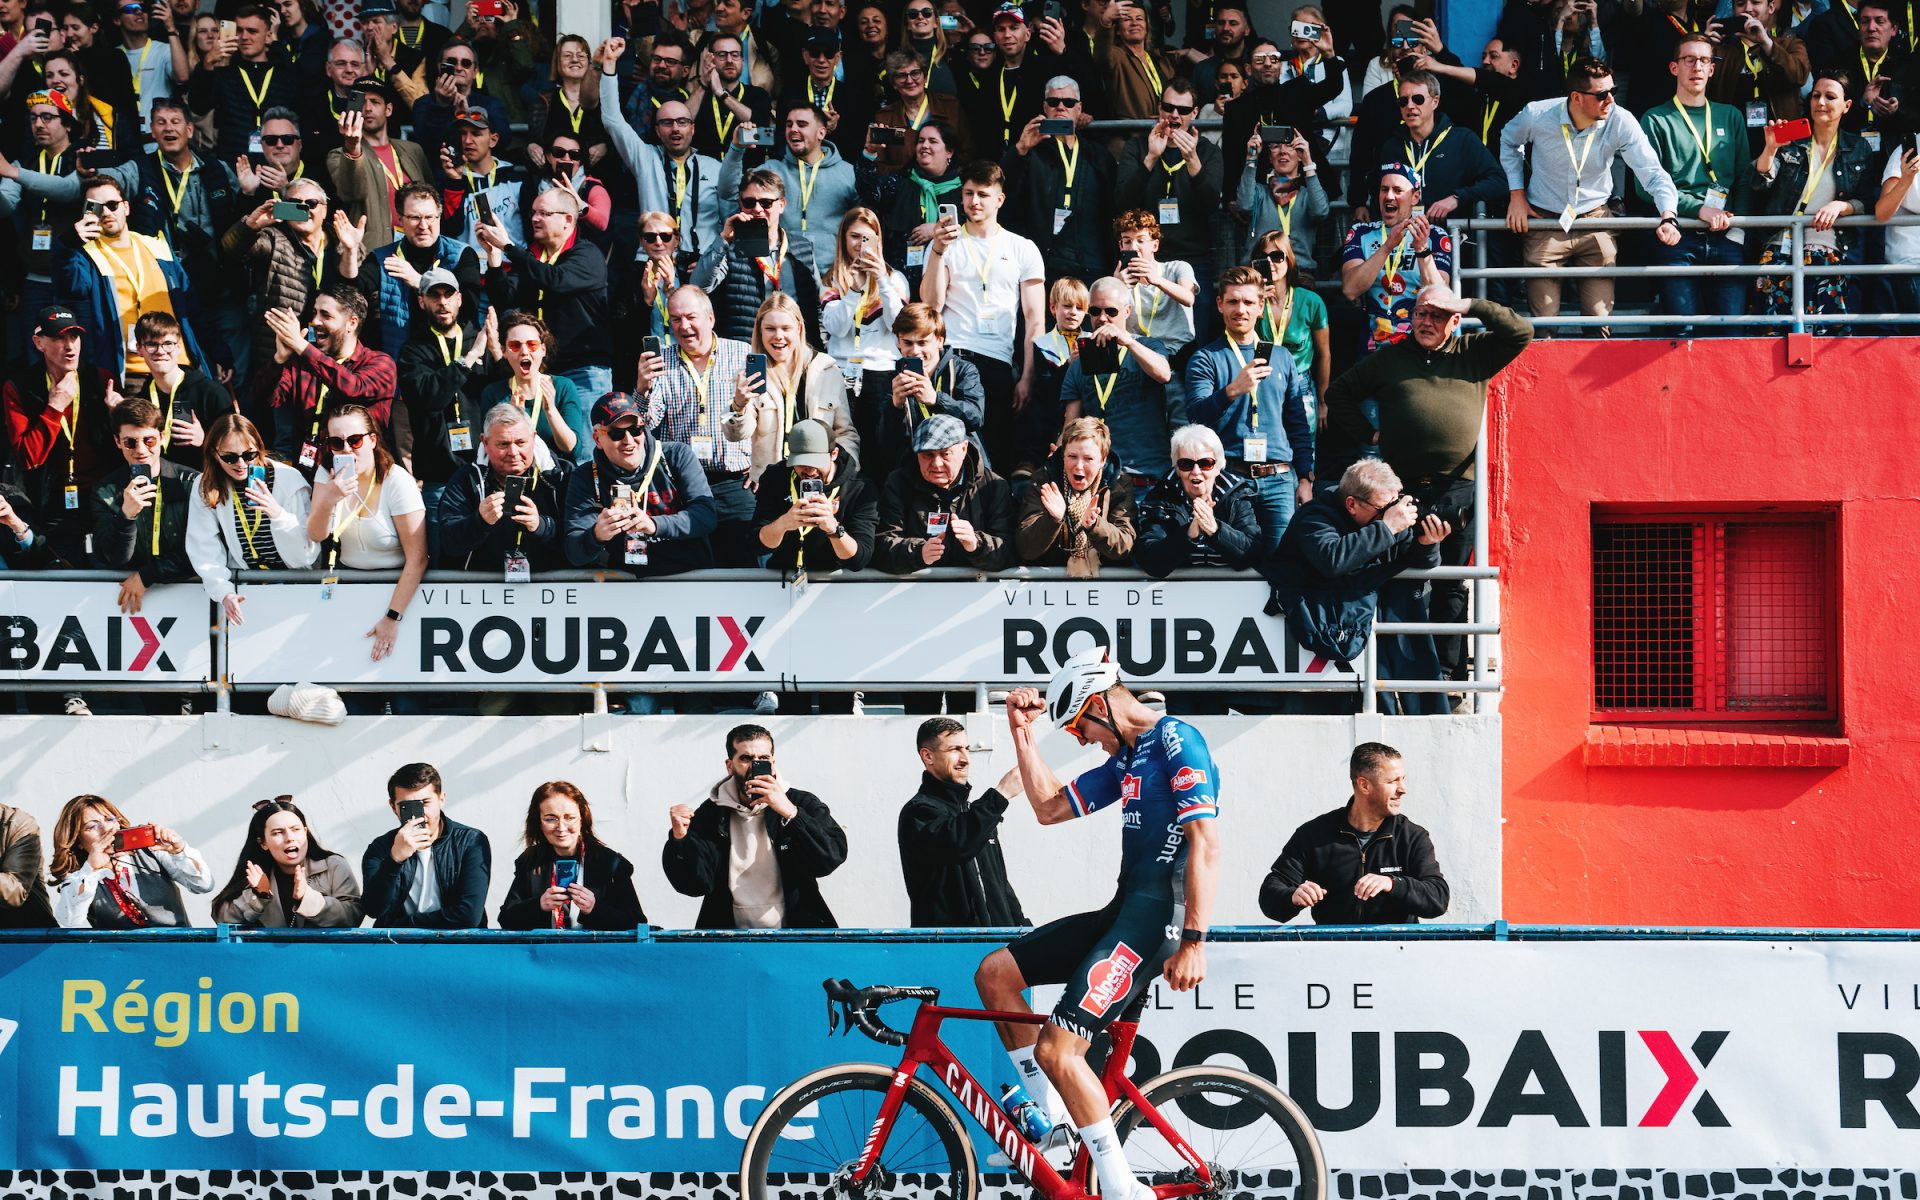 Mathieu van der Poel's victory salute, captured from the infield looking into the packed rafters. The blues, whites and reds of various sponsor banners and velodrome walls, as well as van der Poel's blue kit, white helmet and red bike, evoke the French and Dutch flags.